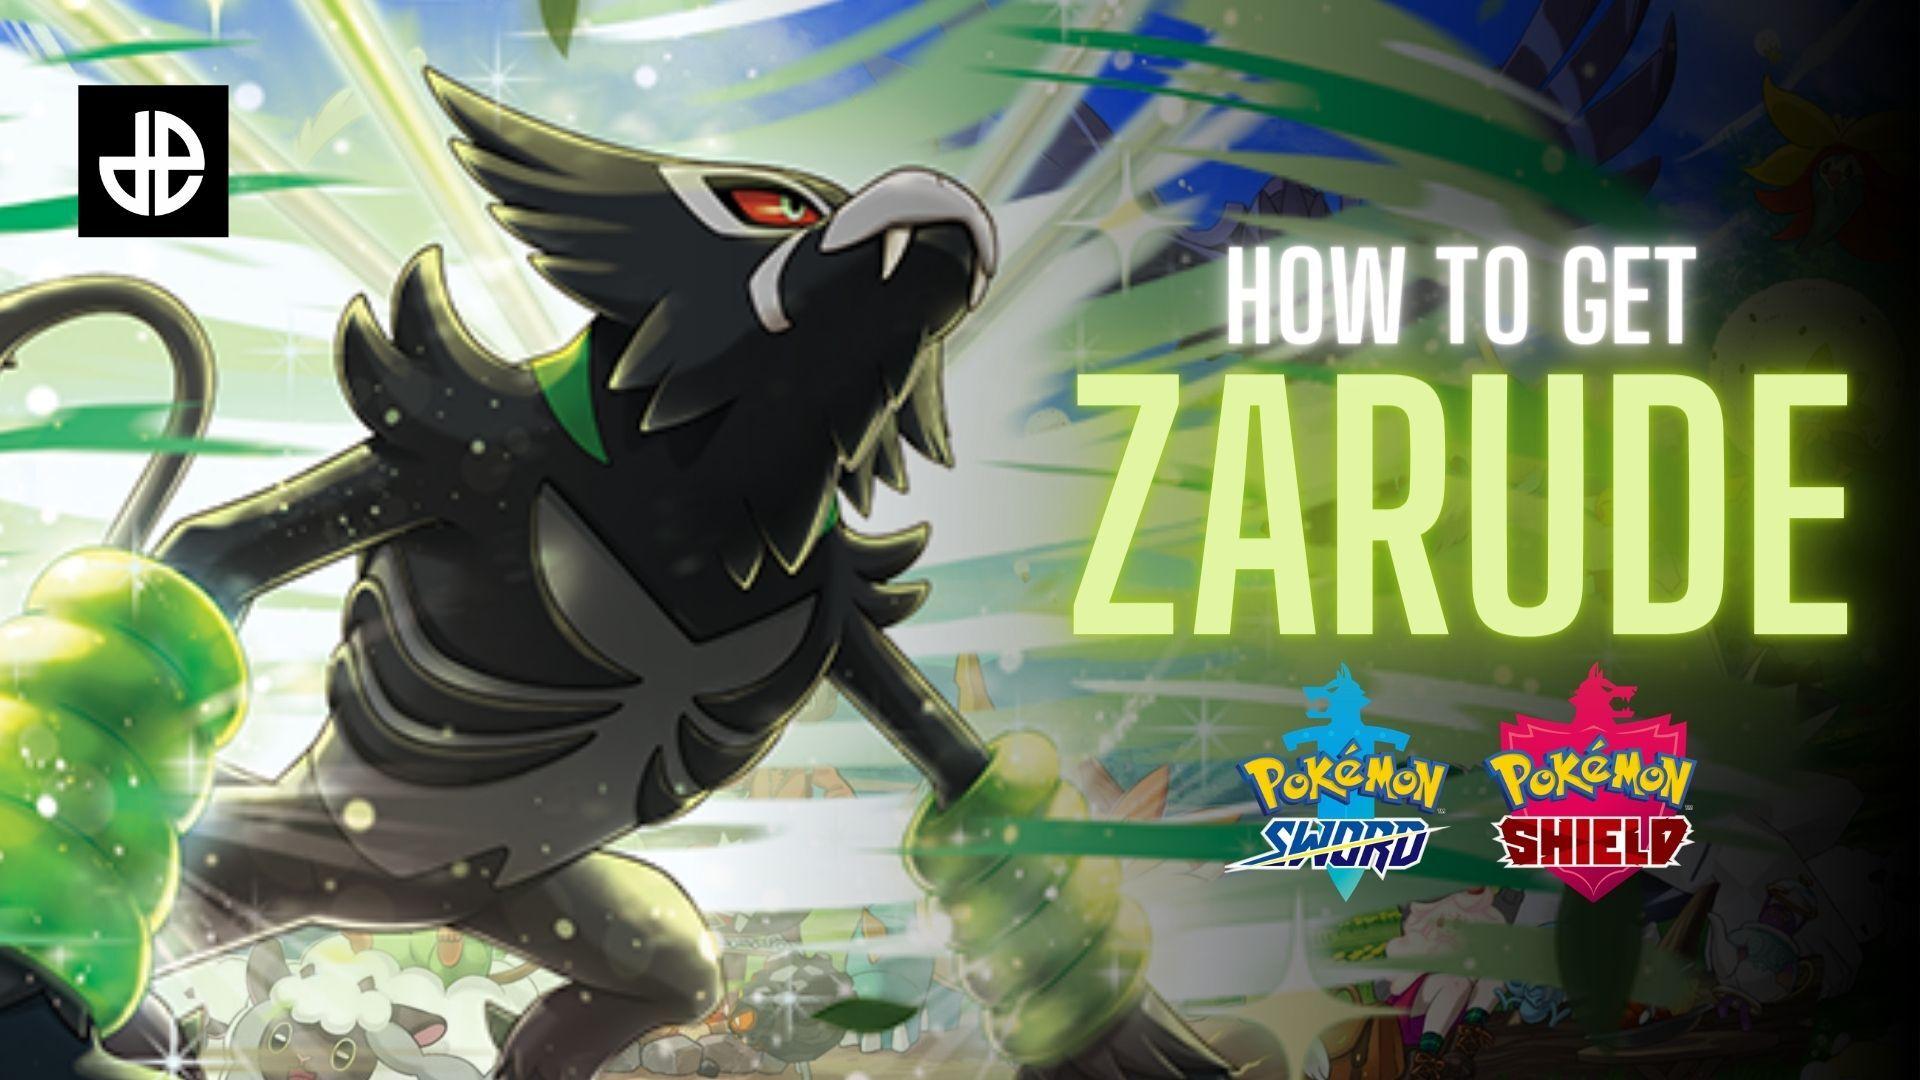 Zarude Release Date & How To Get